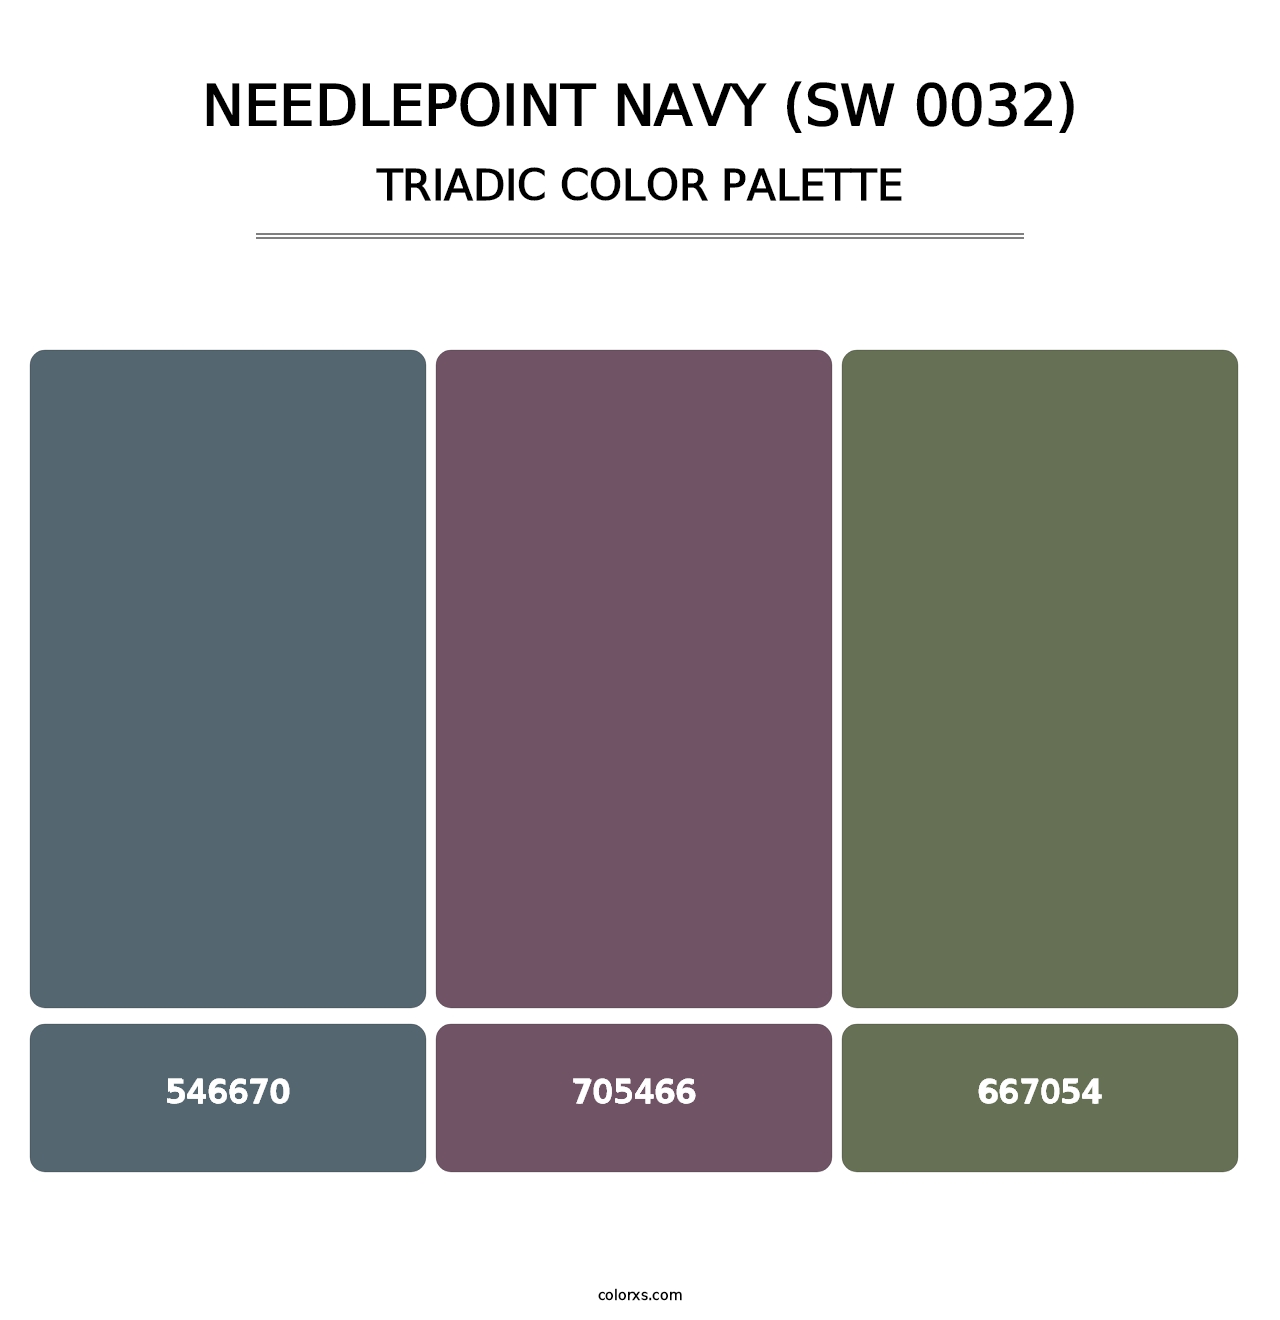 Needlepoint Navy (SW 0032) - Triadic Color Palette